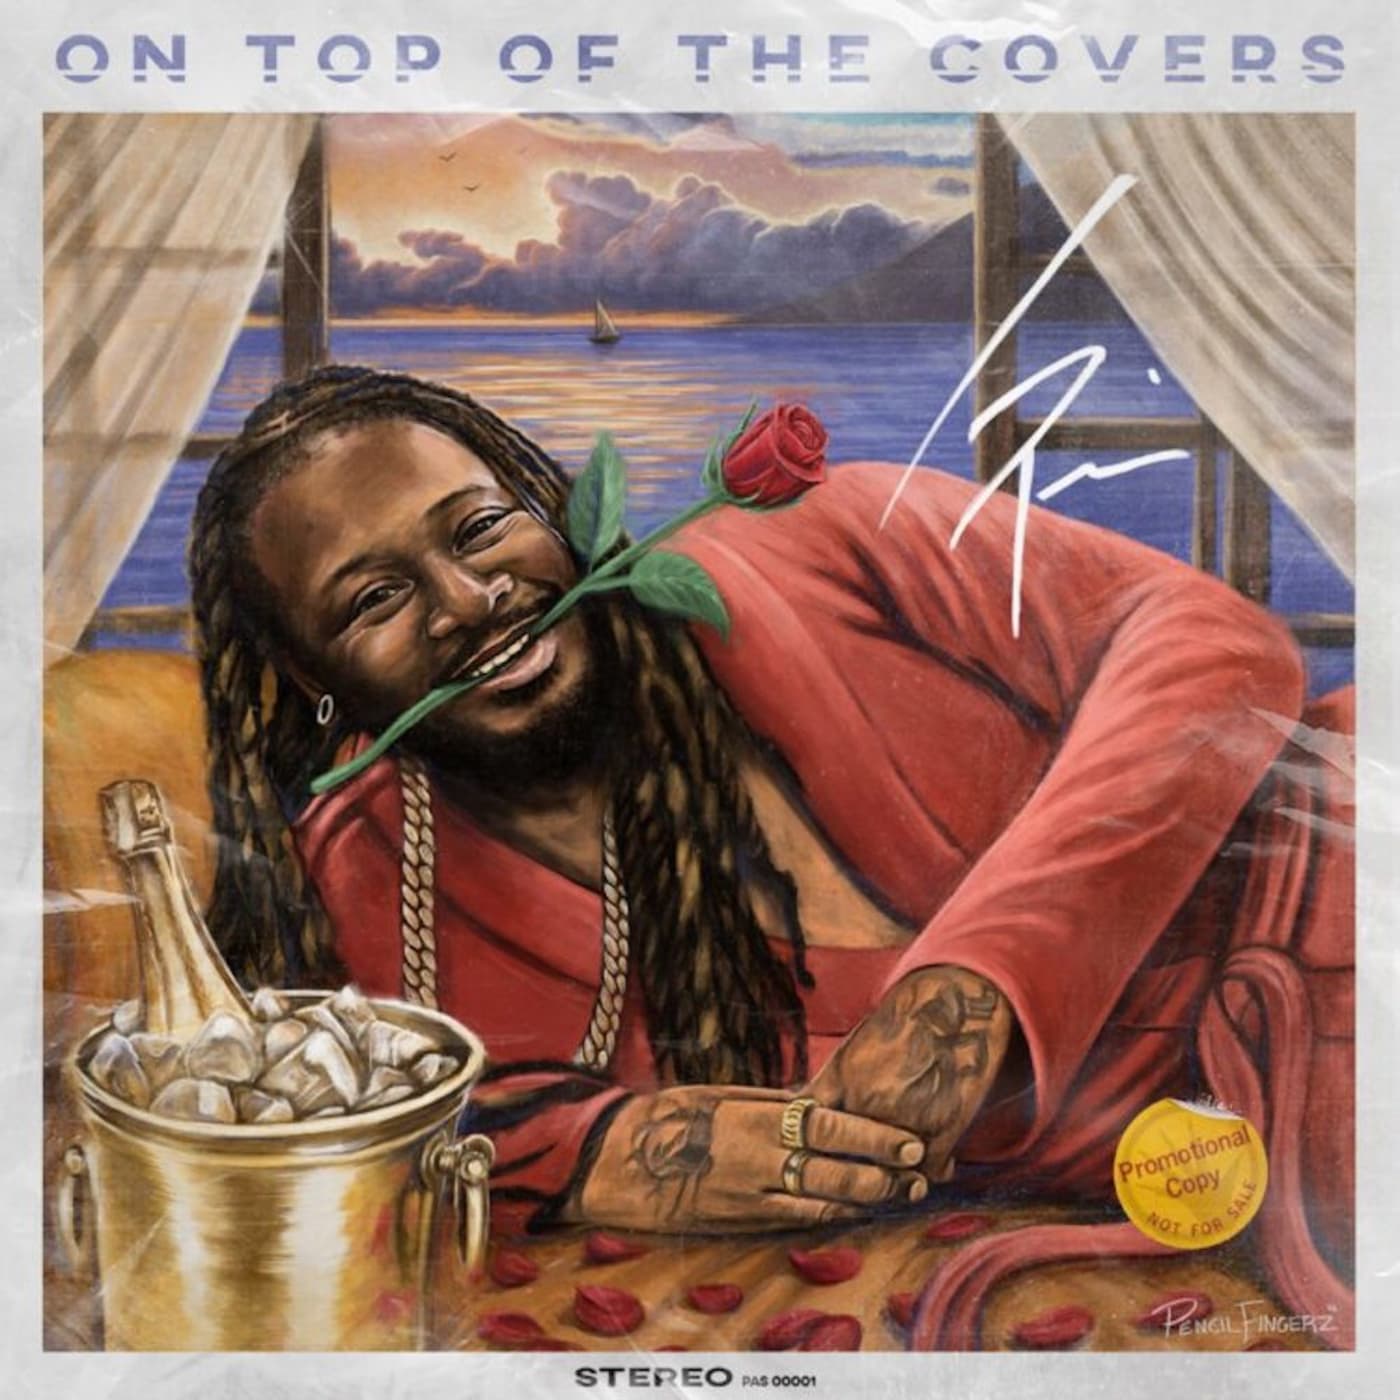 T Pain 'On Top of the Covers' Album